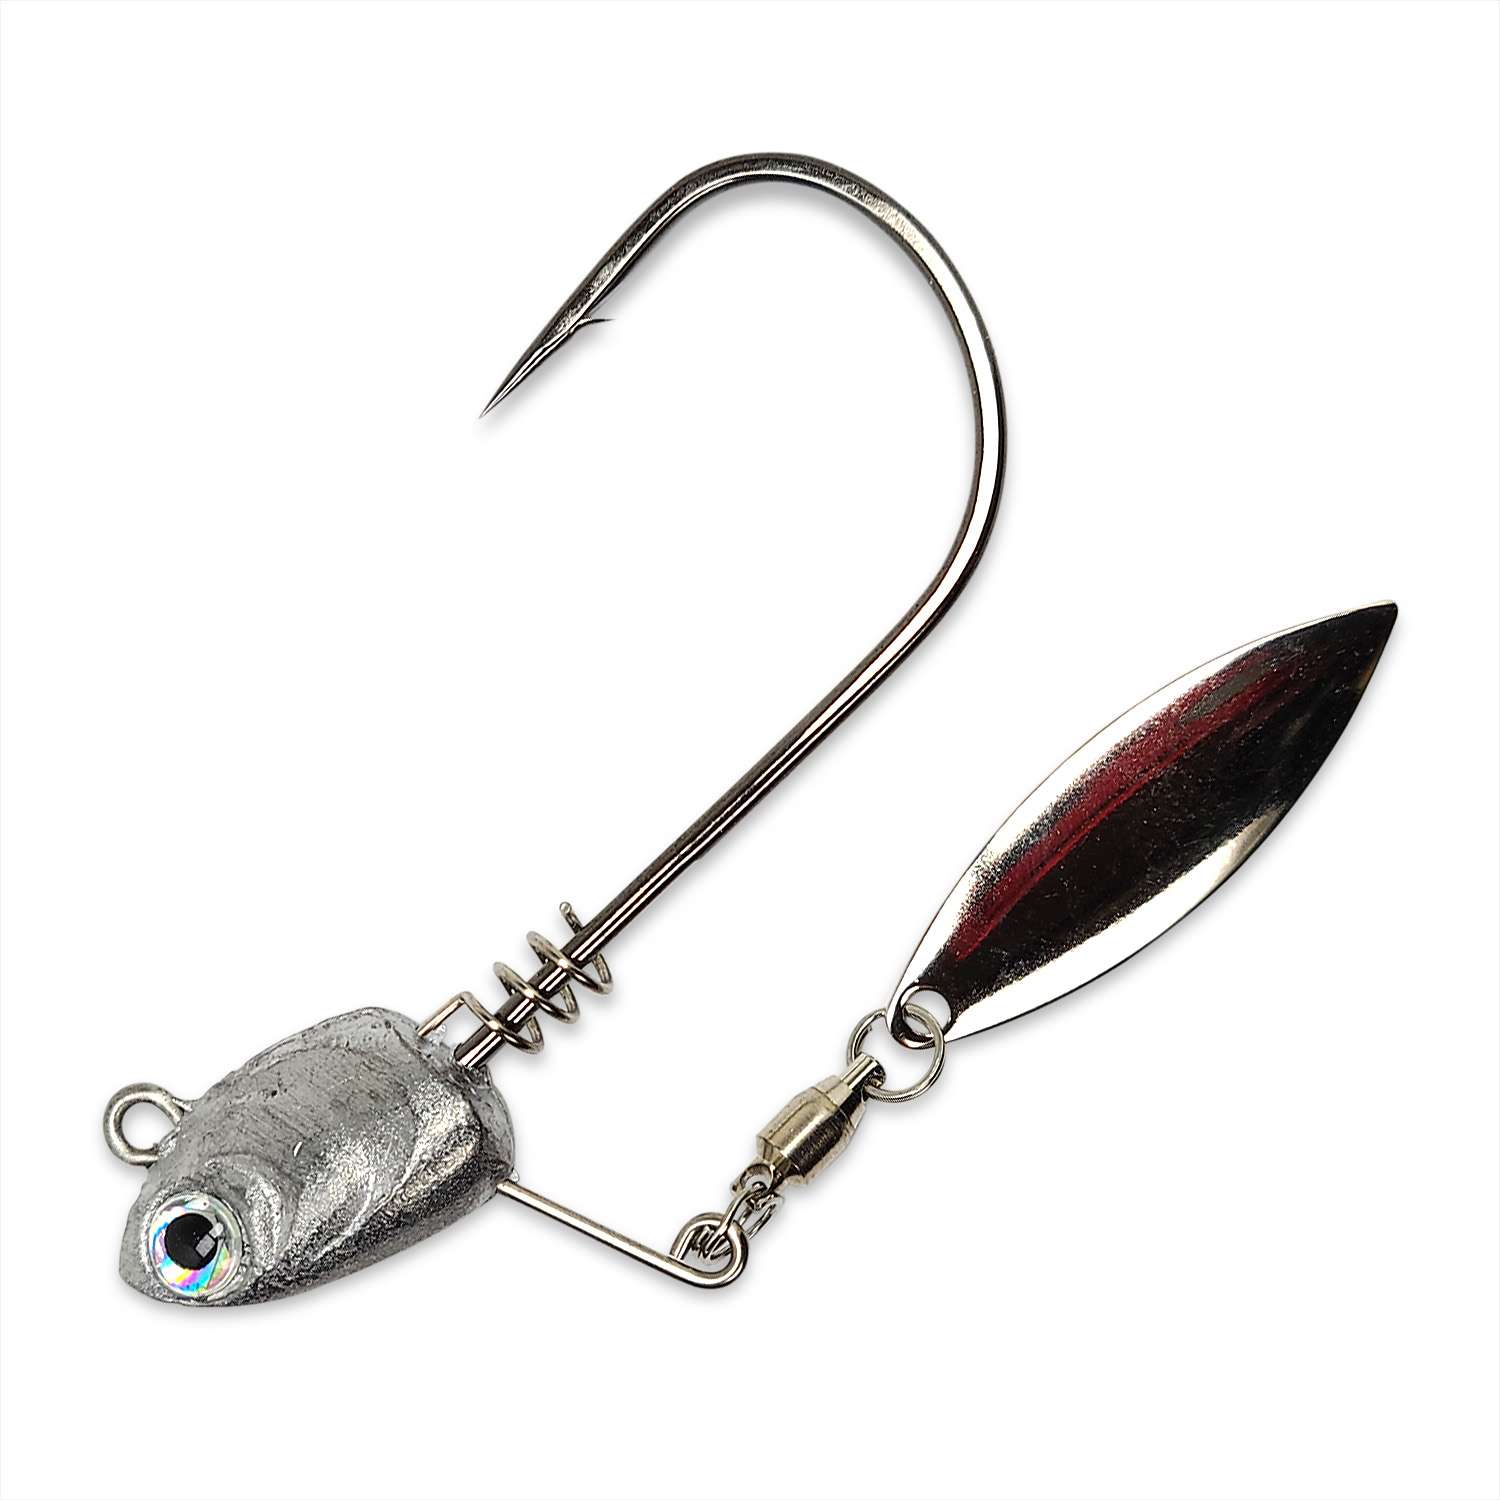 <p><B>Gamakatsu Underspin Head</B></p>
<P>The Under Spin Head features Gamakatsu Heavy Cover 60-degree hook. The heavy wire and wide gap design gives anglers a better hook up ratio and retention when using bulky swim baits. Ideal for heavy braid or fluorocarbon line. The head profile is streamlined to glide through cover. Gamakatsu Spring Lock holds swim baits and other plastics gently but firmly, keeping your presentation straight on the hook. Recessed lifelike eyes on the Under Spin provide a focal point for predators. The small chrome blade is attached to a quality ball-bearing swivel allowing it to spin freely, even at the slowest retrieves, to simulate baitfish and create a subtle trigger.  </p><P><B>MSRP:  $4.99</b></p>